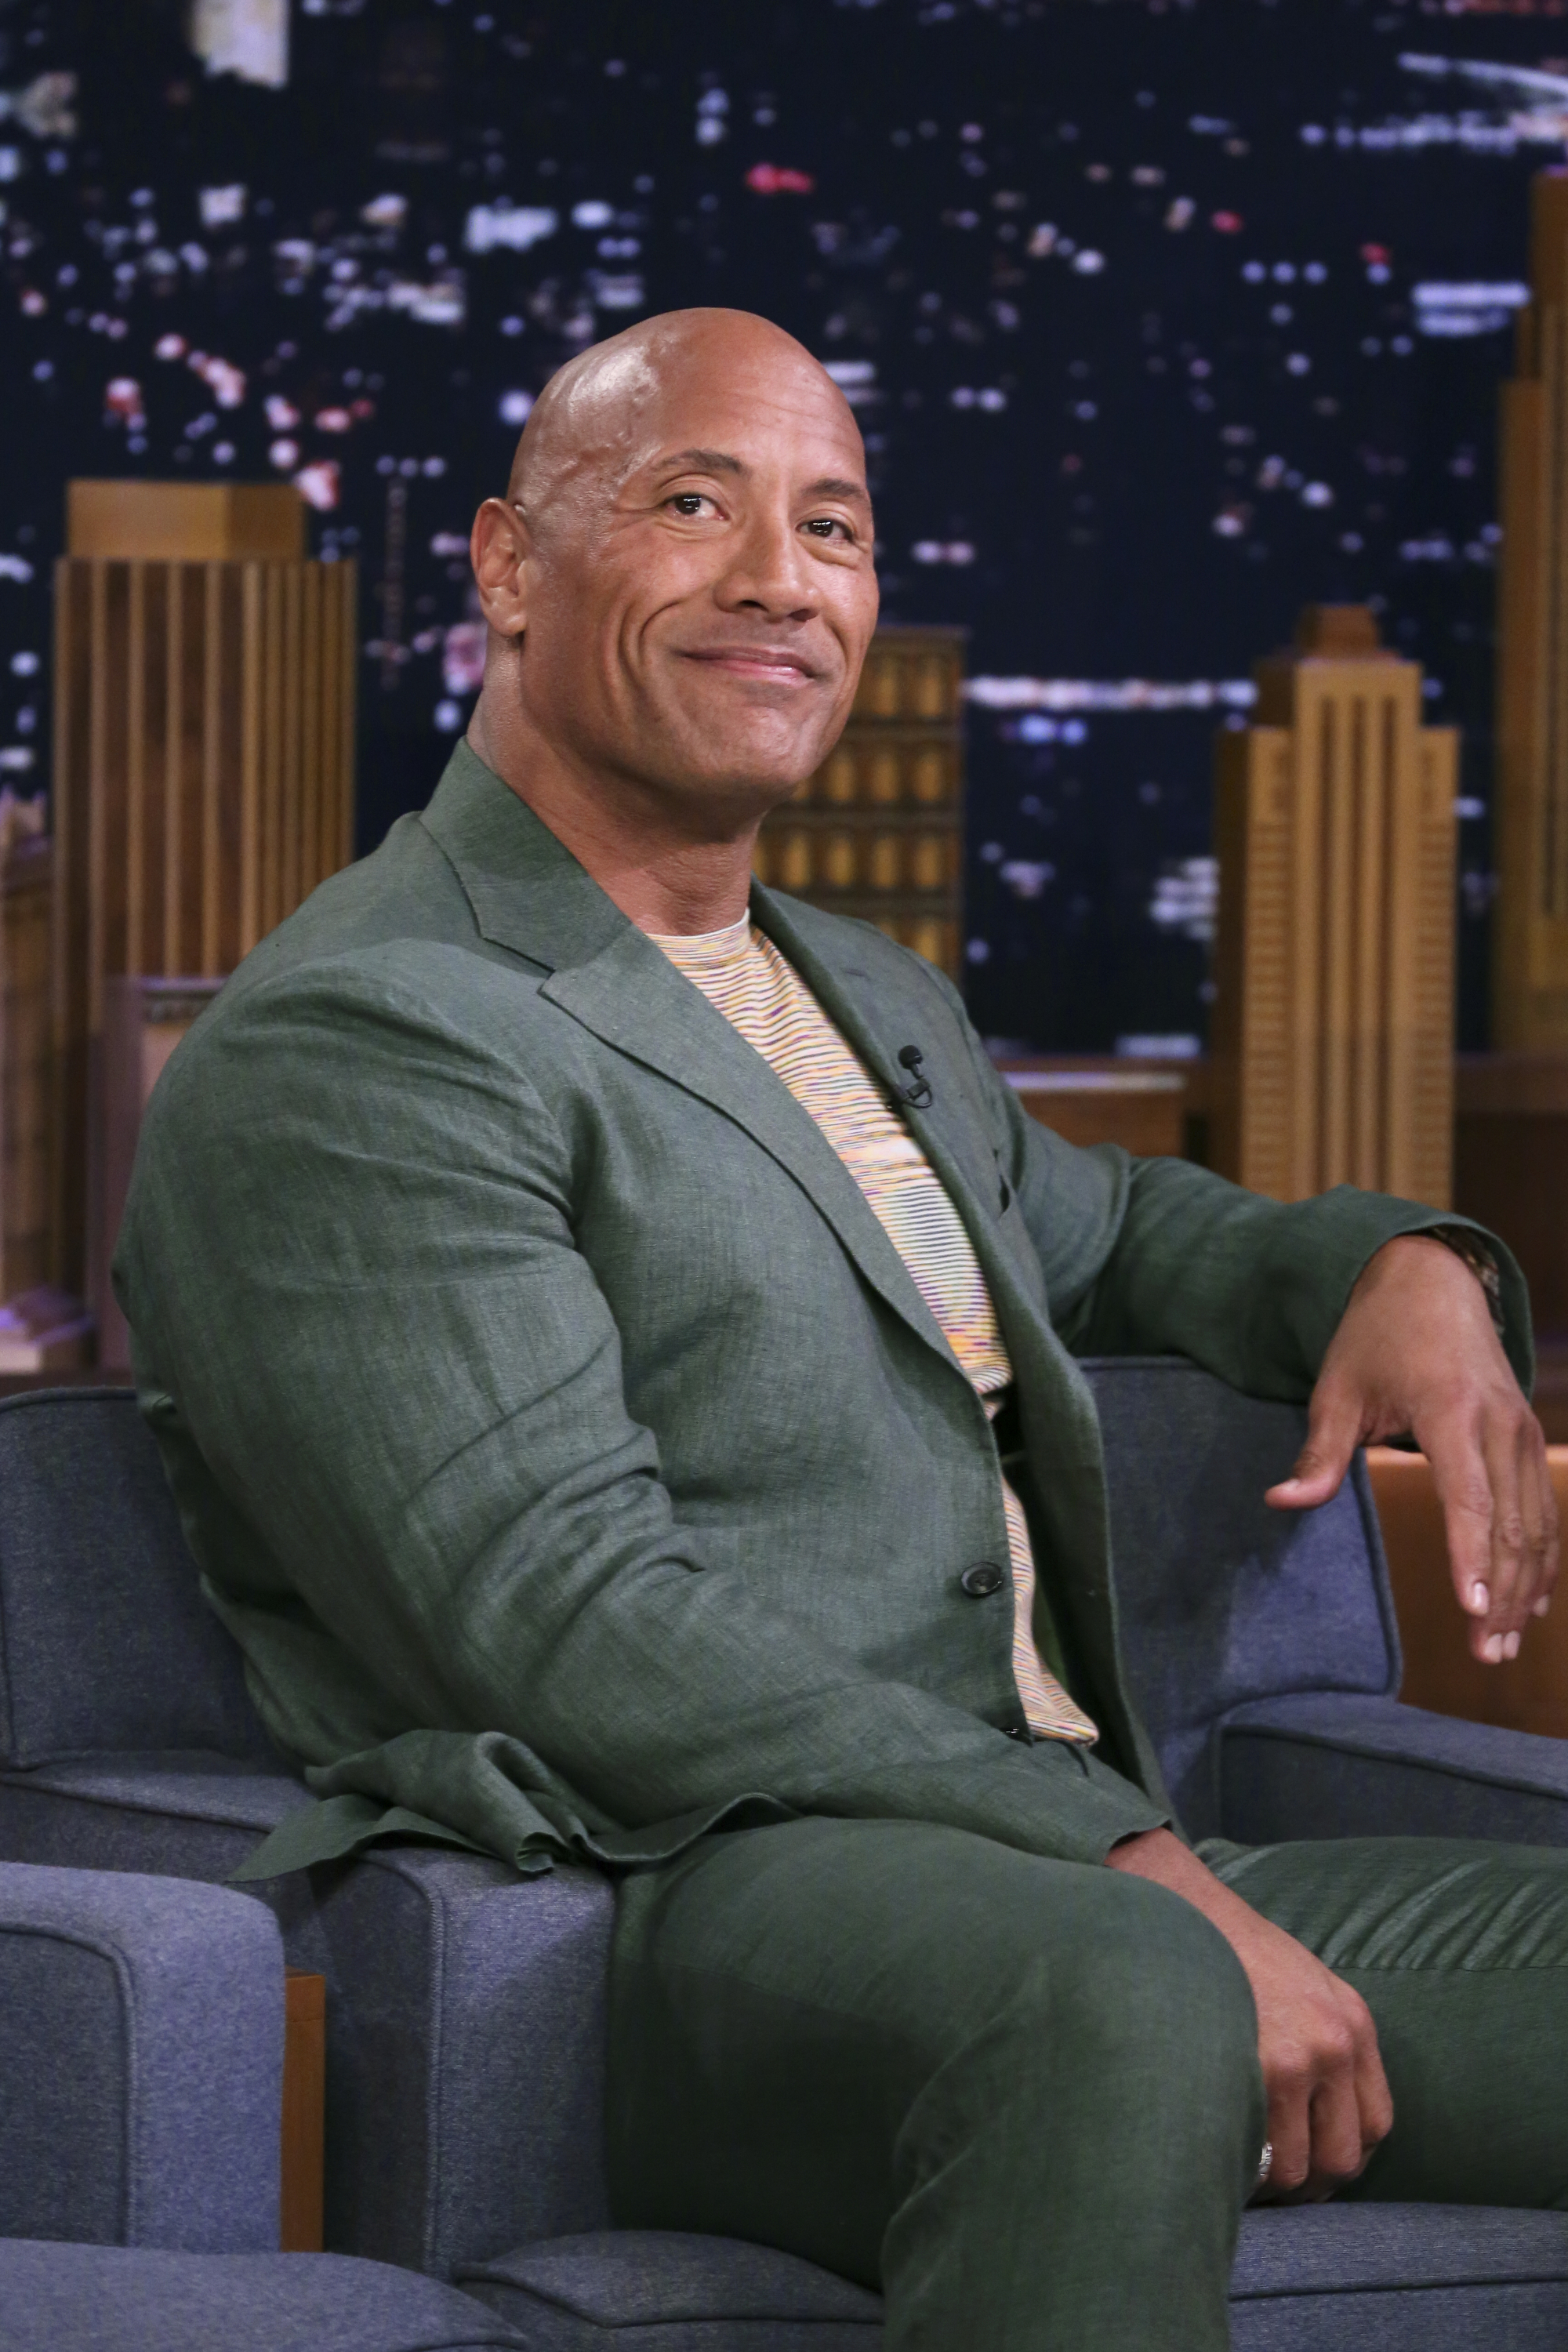 Dwayne Johnson smiles, seated in a talk show setting, wearing a green suit with a textured shirt